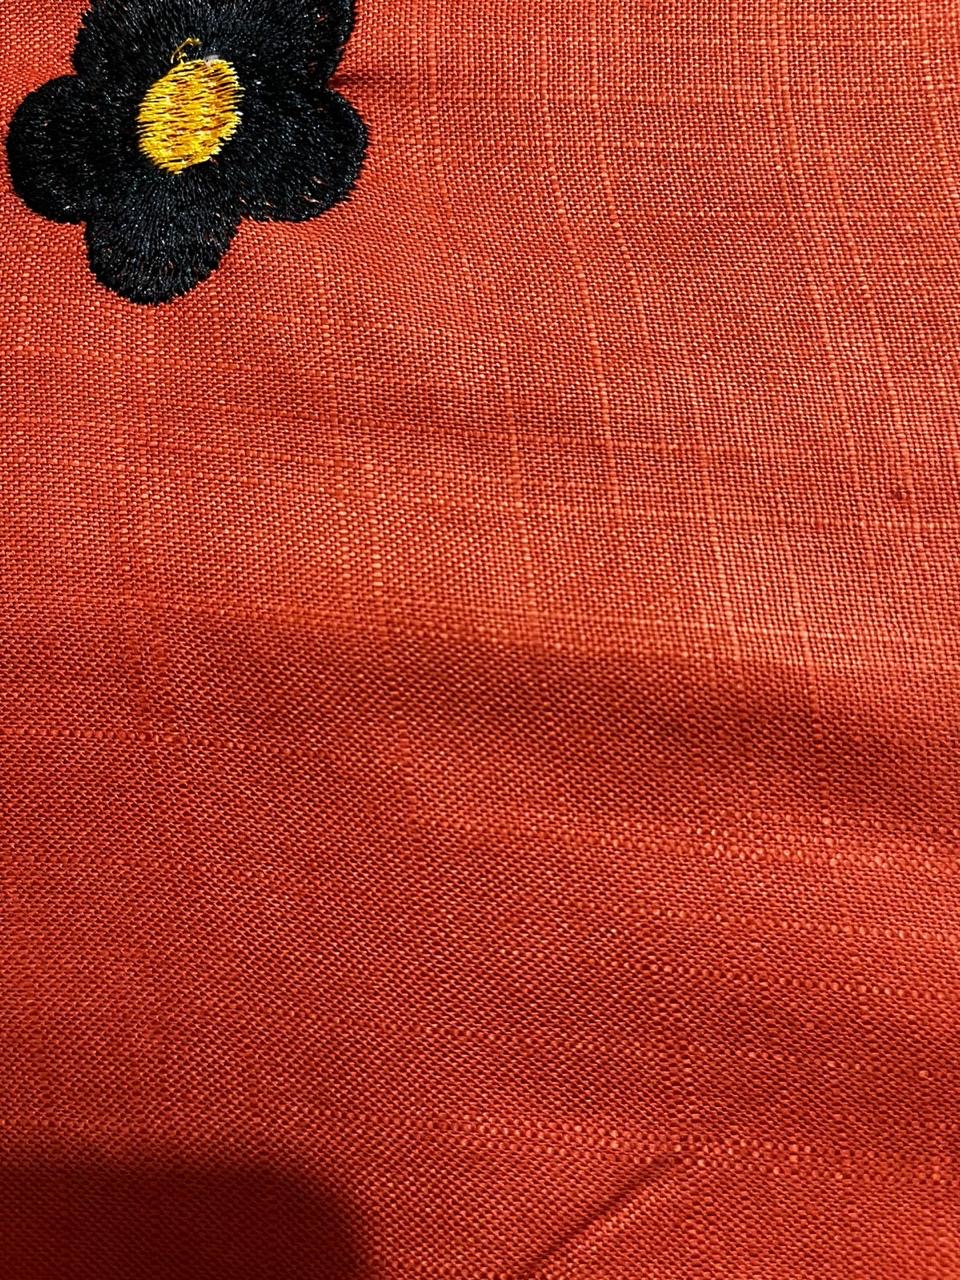 Handloom 100% Viscose Fabric with Embroidery motif - Rust with Black floral embroidery